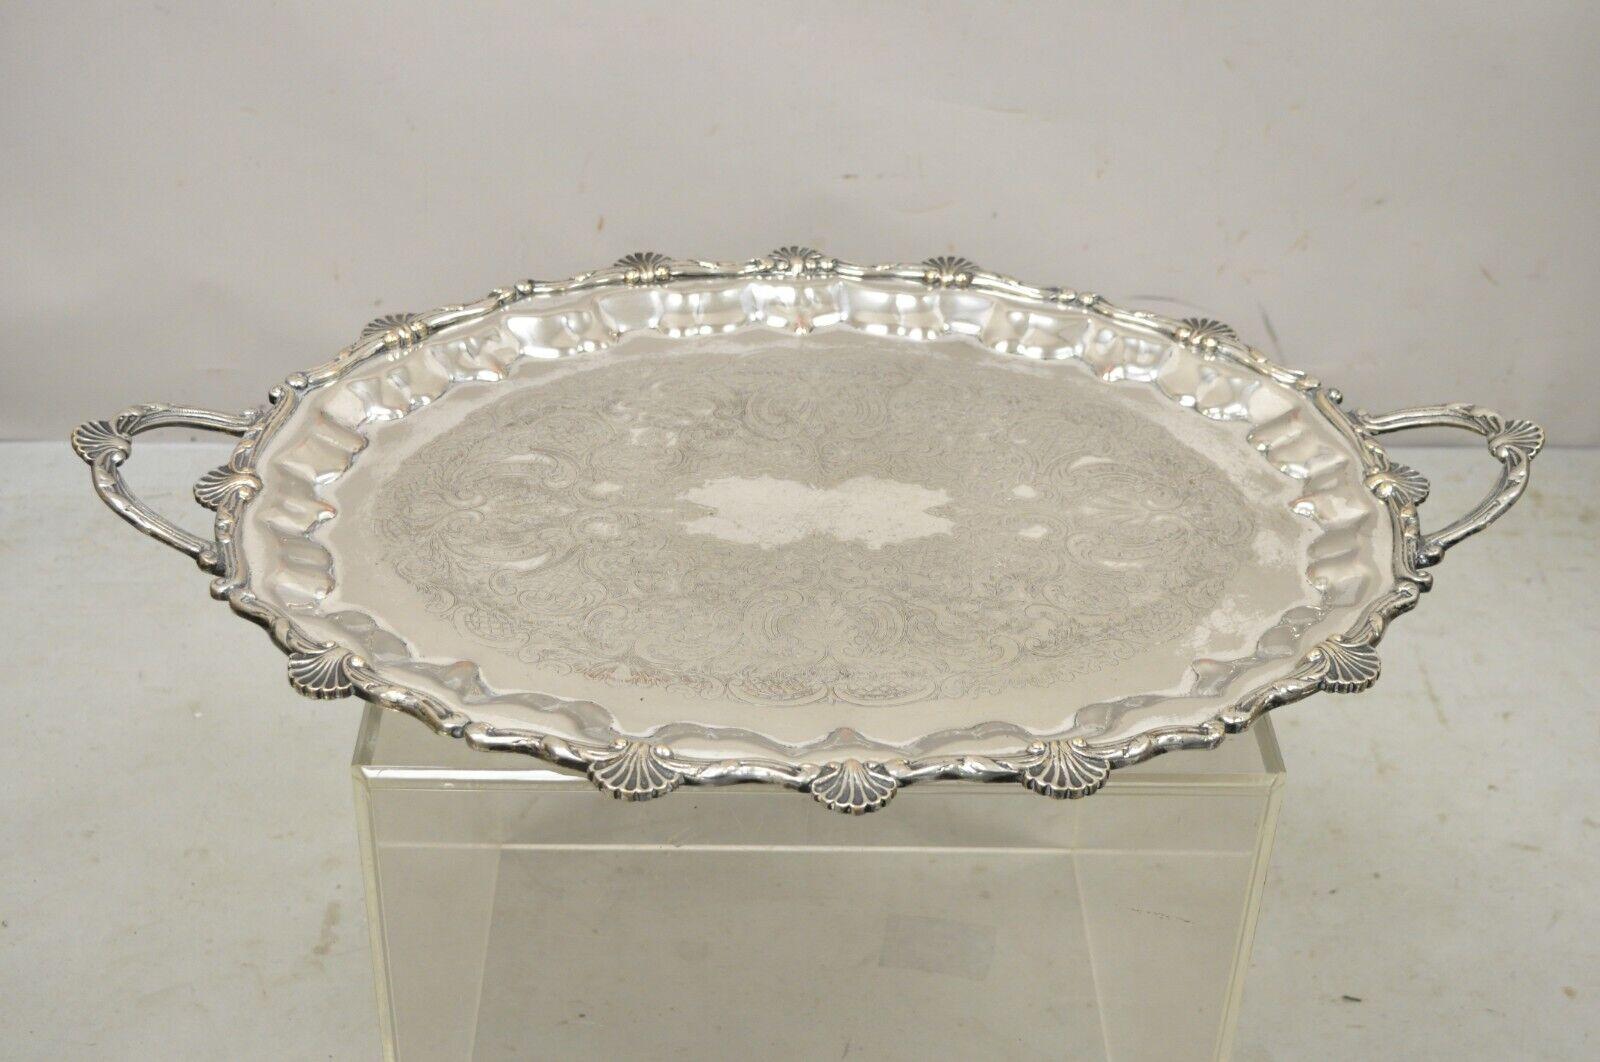 Large Vintage Edward San Giovanni Silver Plated Shell Form Twin Handle Platter Tray. Item featured is a large impressive size, ornate shell form, twin handles. Circa Early to Mid 20th Century. Measurements: 2.5